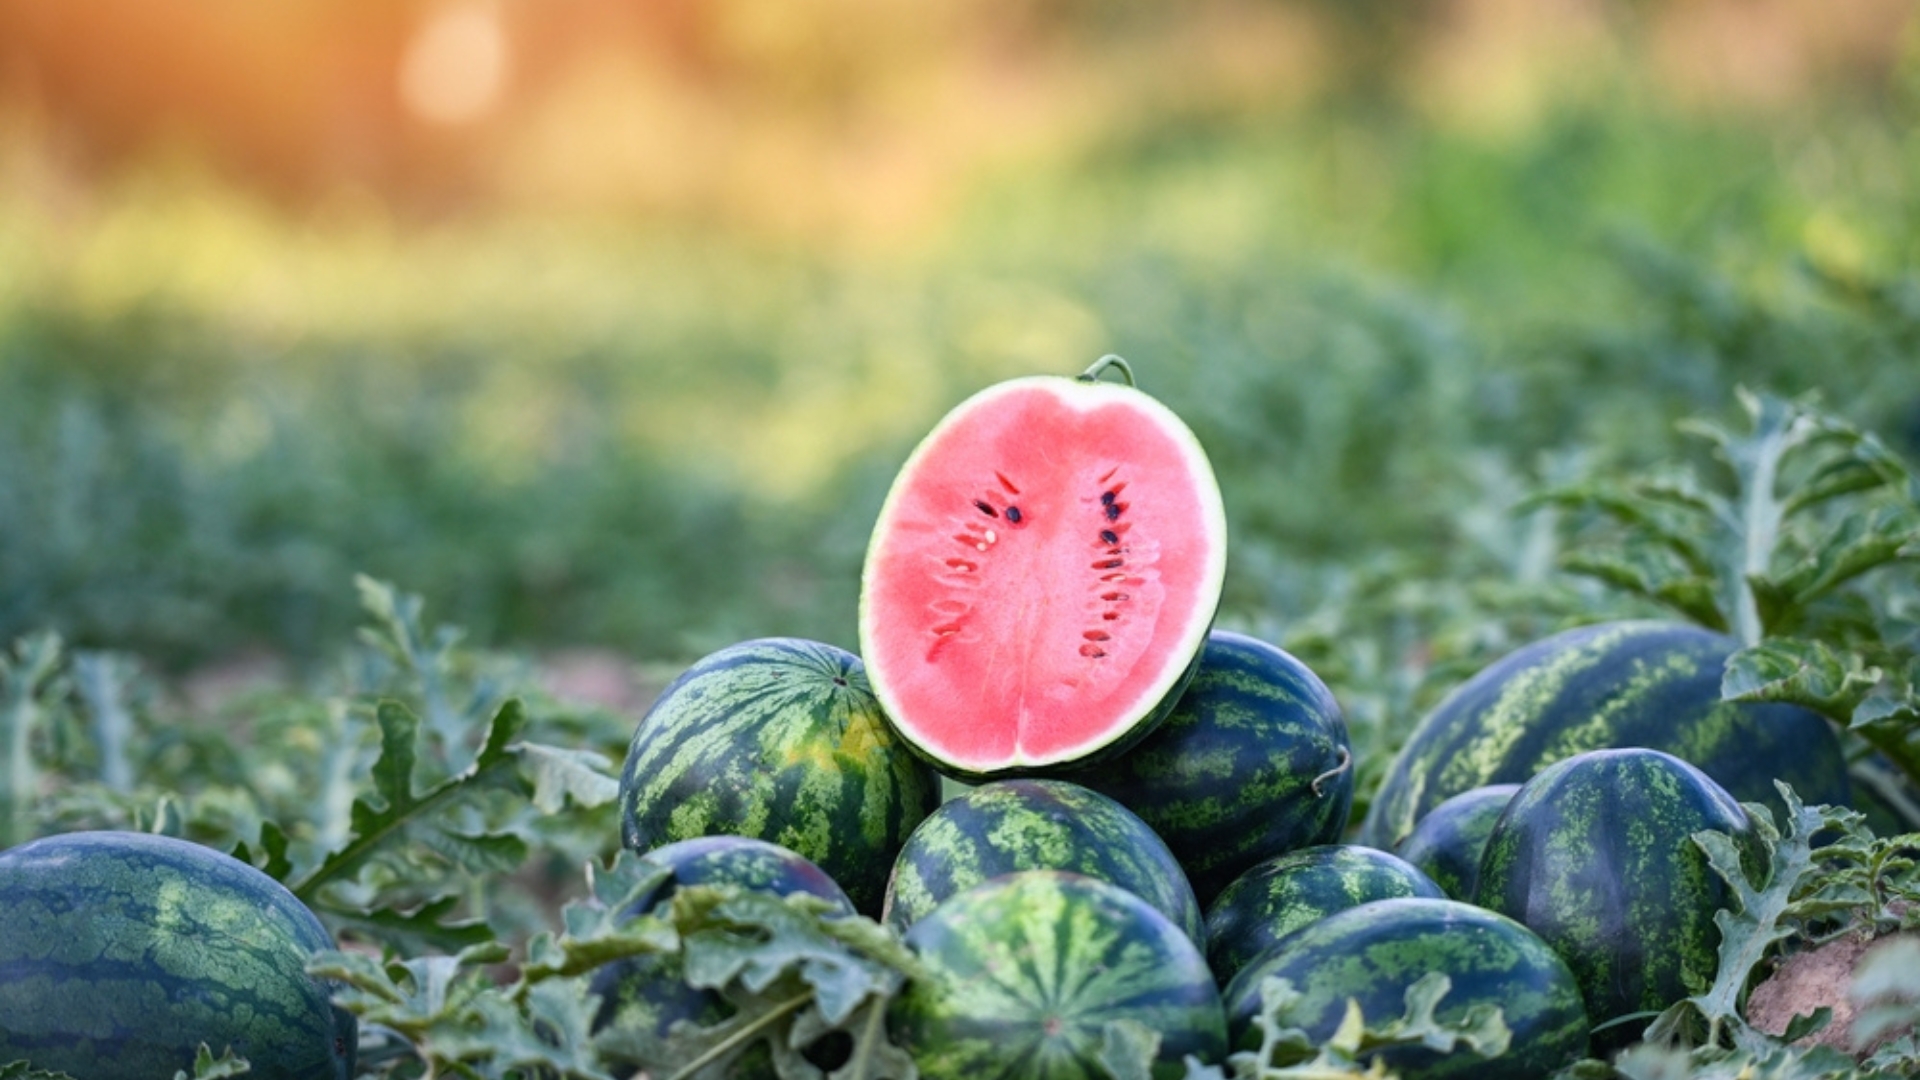 Ready, Set, Harvest: These 3 Simple Tips Will Help You Check If Your Watermelons Are Fully Ripe